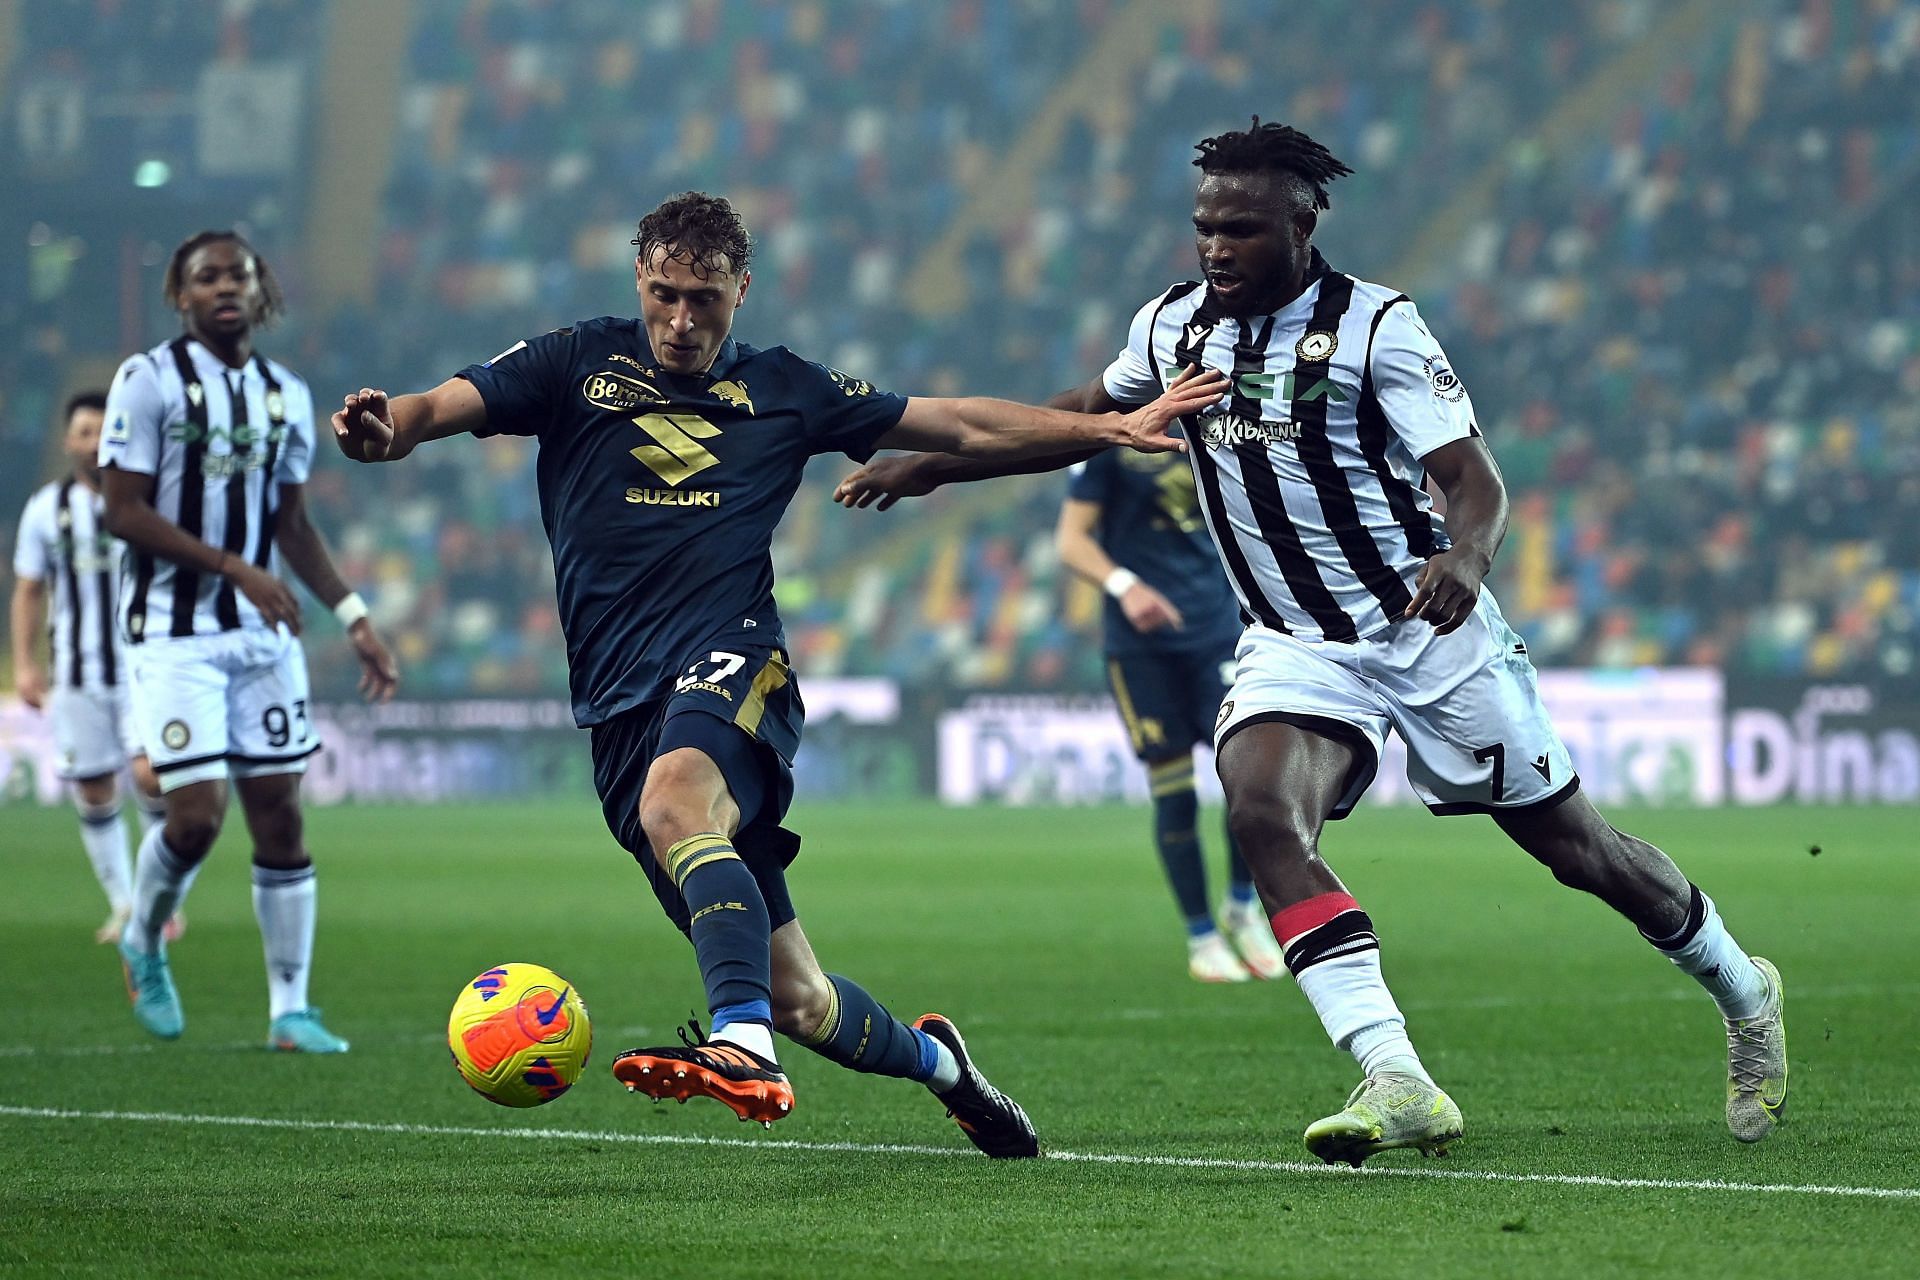 Udinese v catania betting previews ff7 gold saucer chocobo racing betting directory